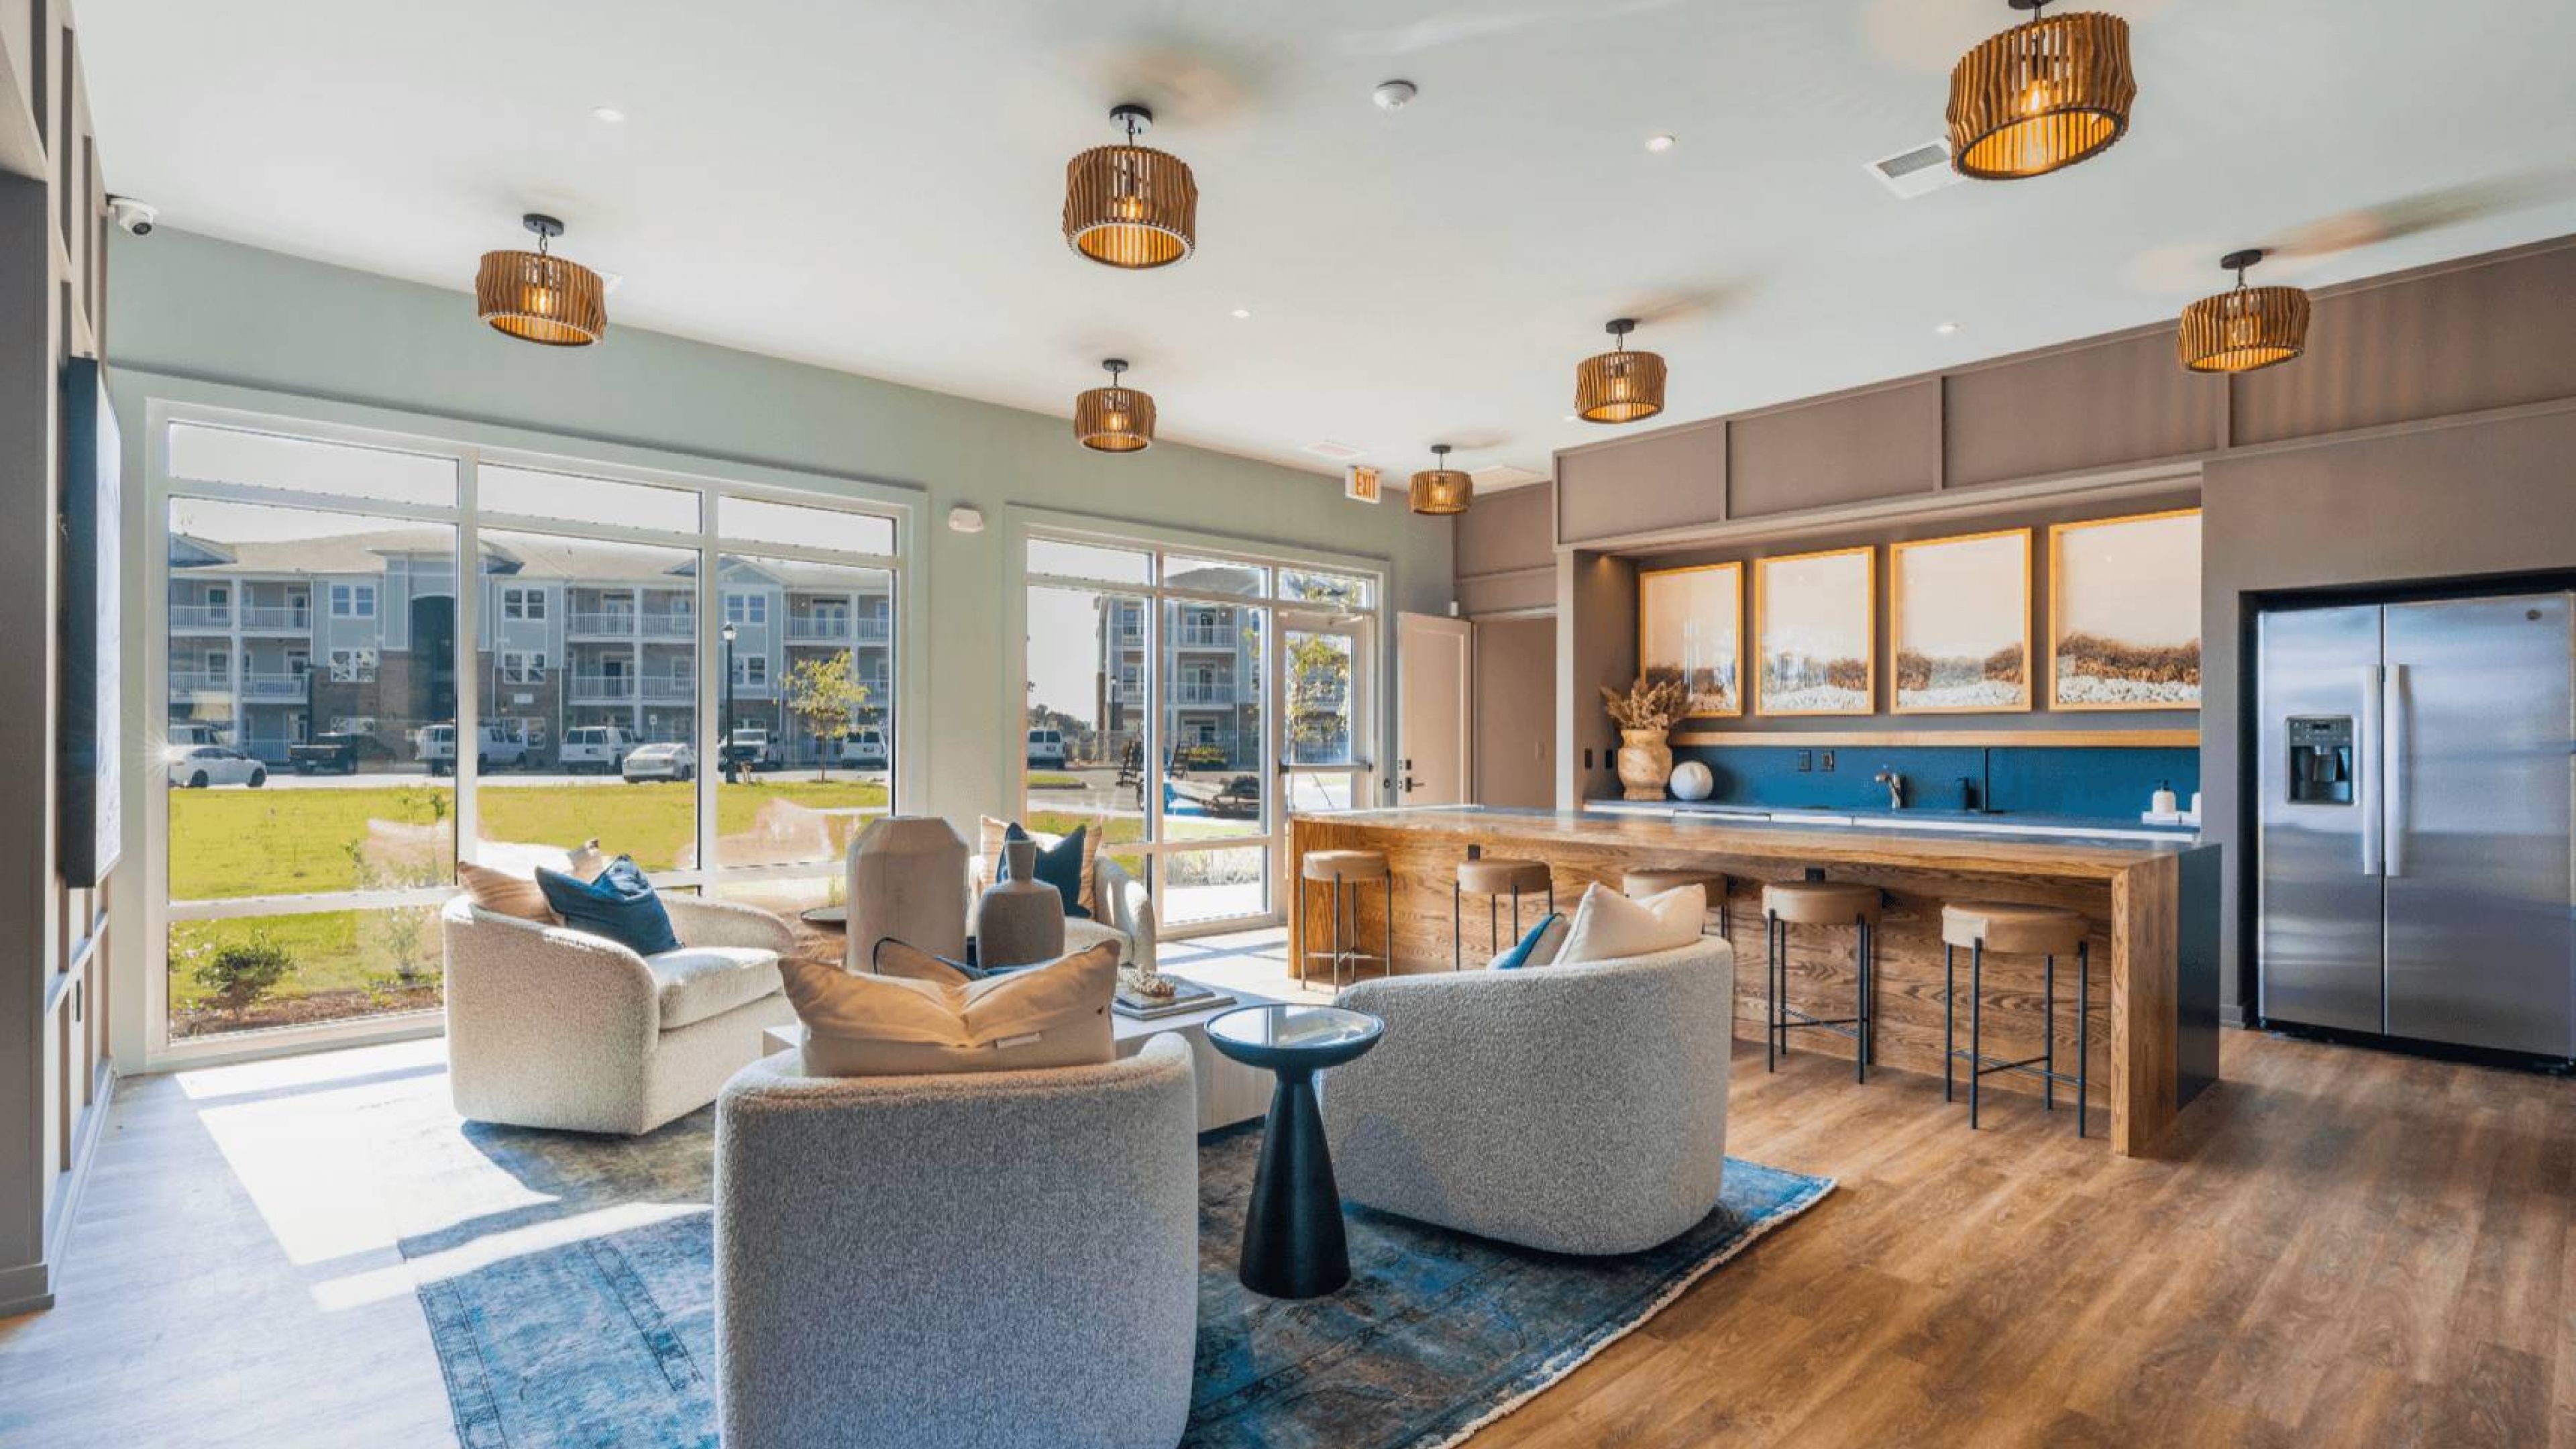 Hawthorne Waterway resident clubhouse amenity with seating area and beautiful finishes